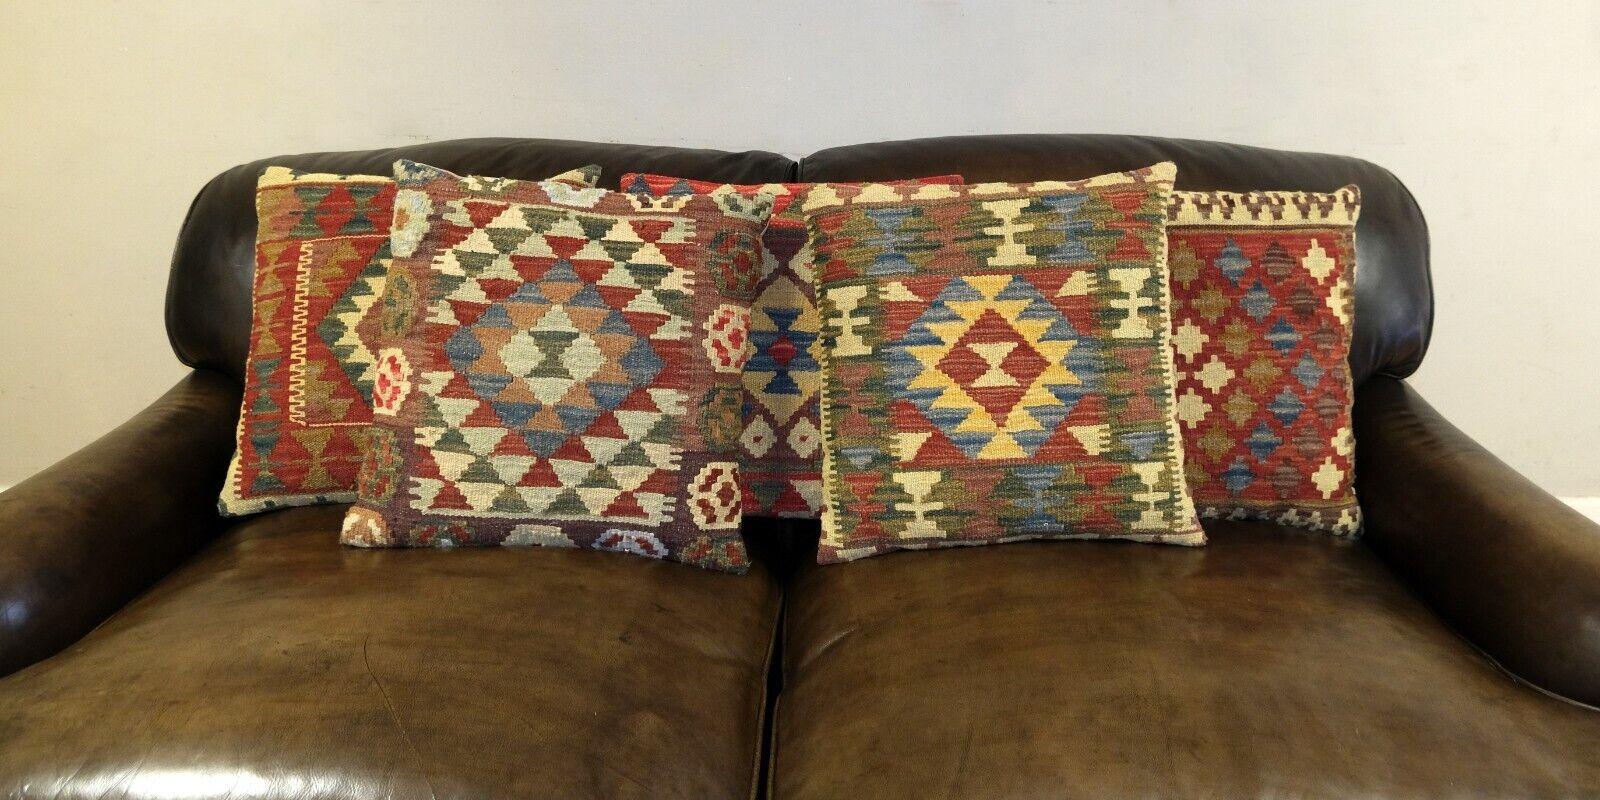 We are delighted to offer for sale this lovely set of four traditional Kilim handmade wool square cushions.

This set has been handwoven with traditional kilim, flat weave technique, which is presented in geometric colours such as beige, red, blue,